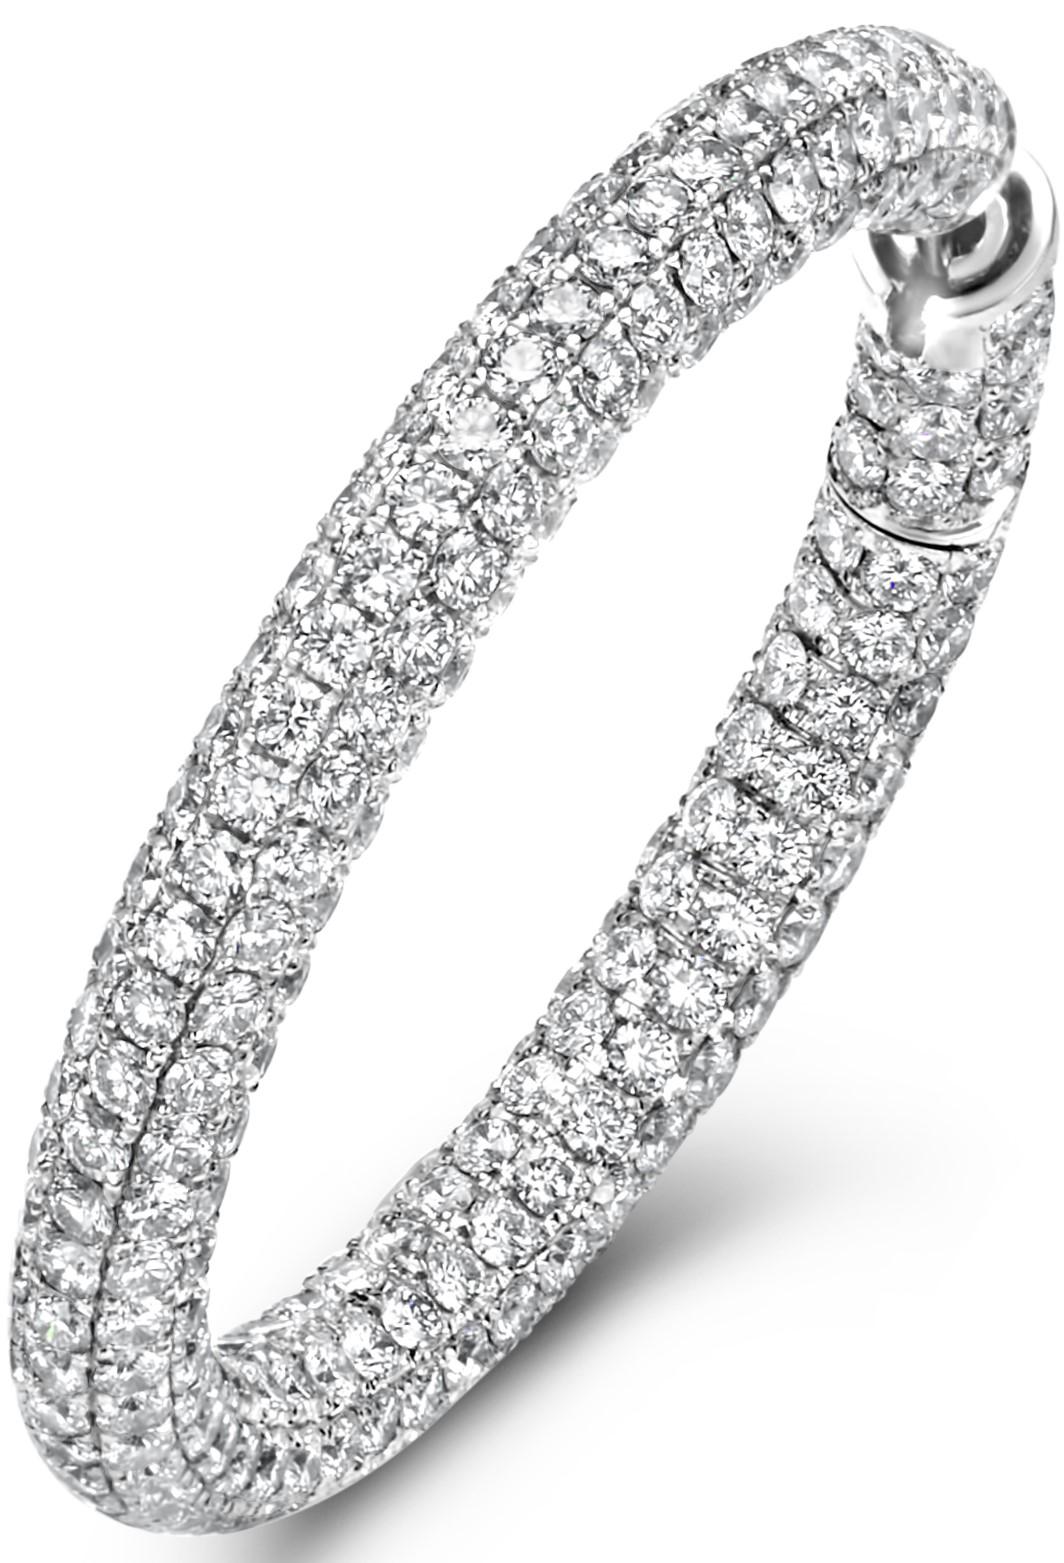 Magnificent 18 Karat White Gold Hoop Earrings with 22.6 Carat Diamonds In New Condition For Sale In Antwerp, BE